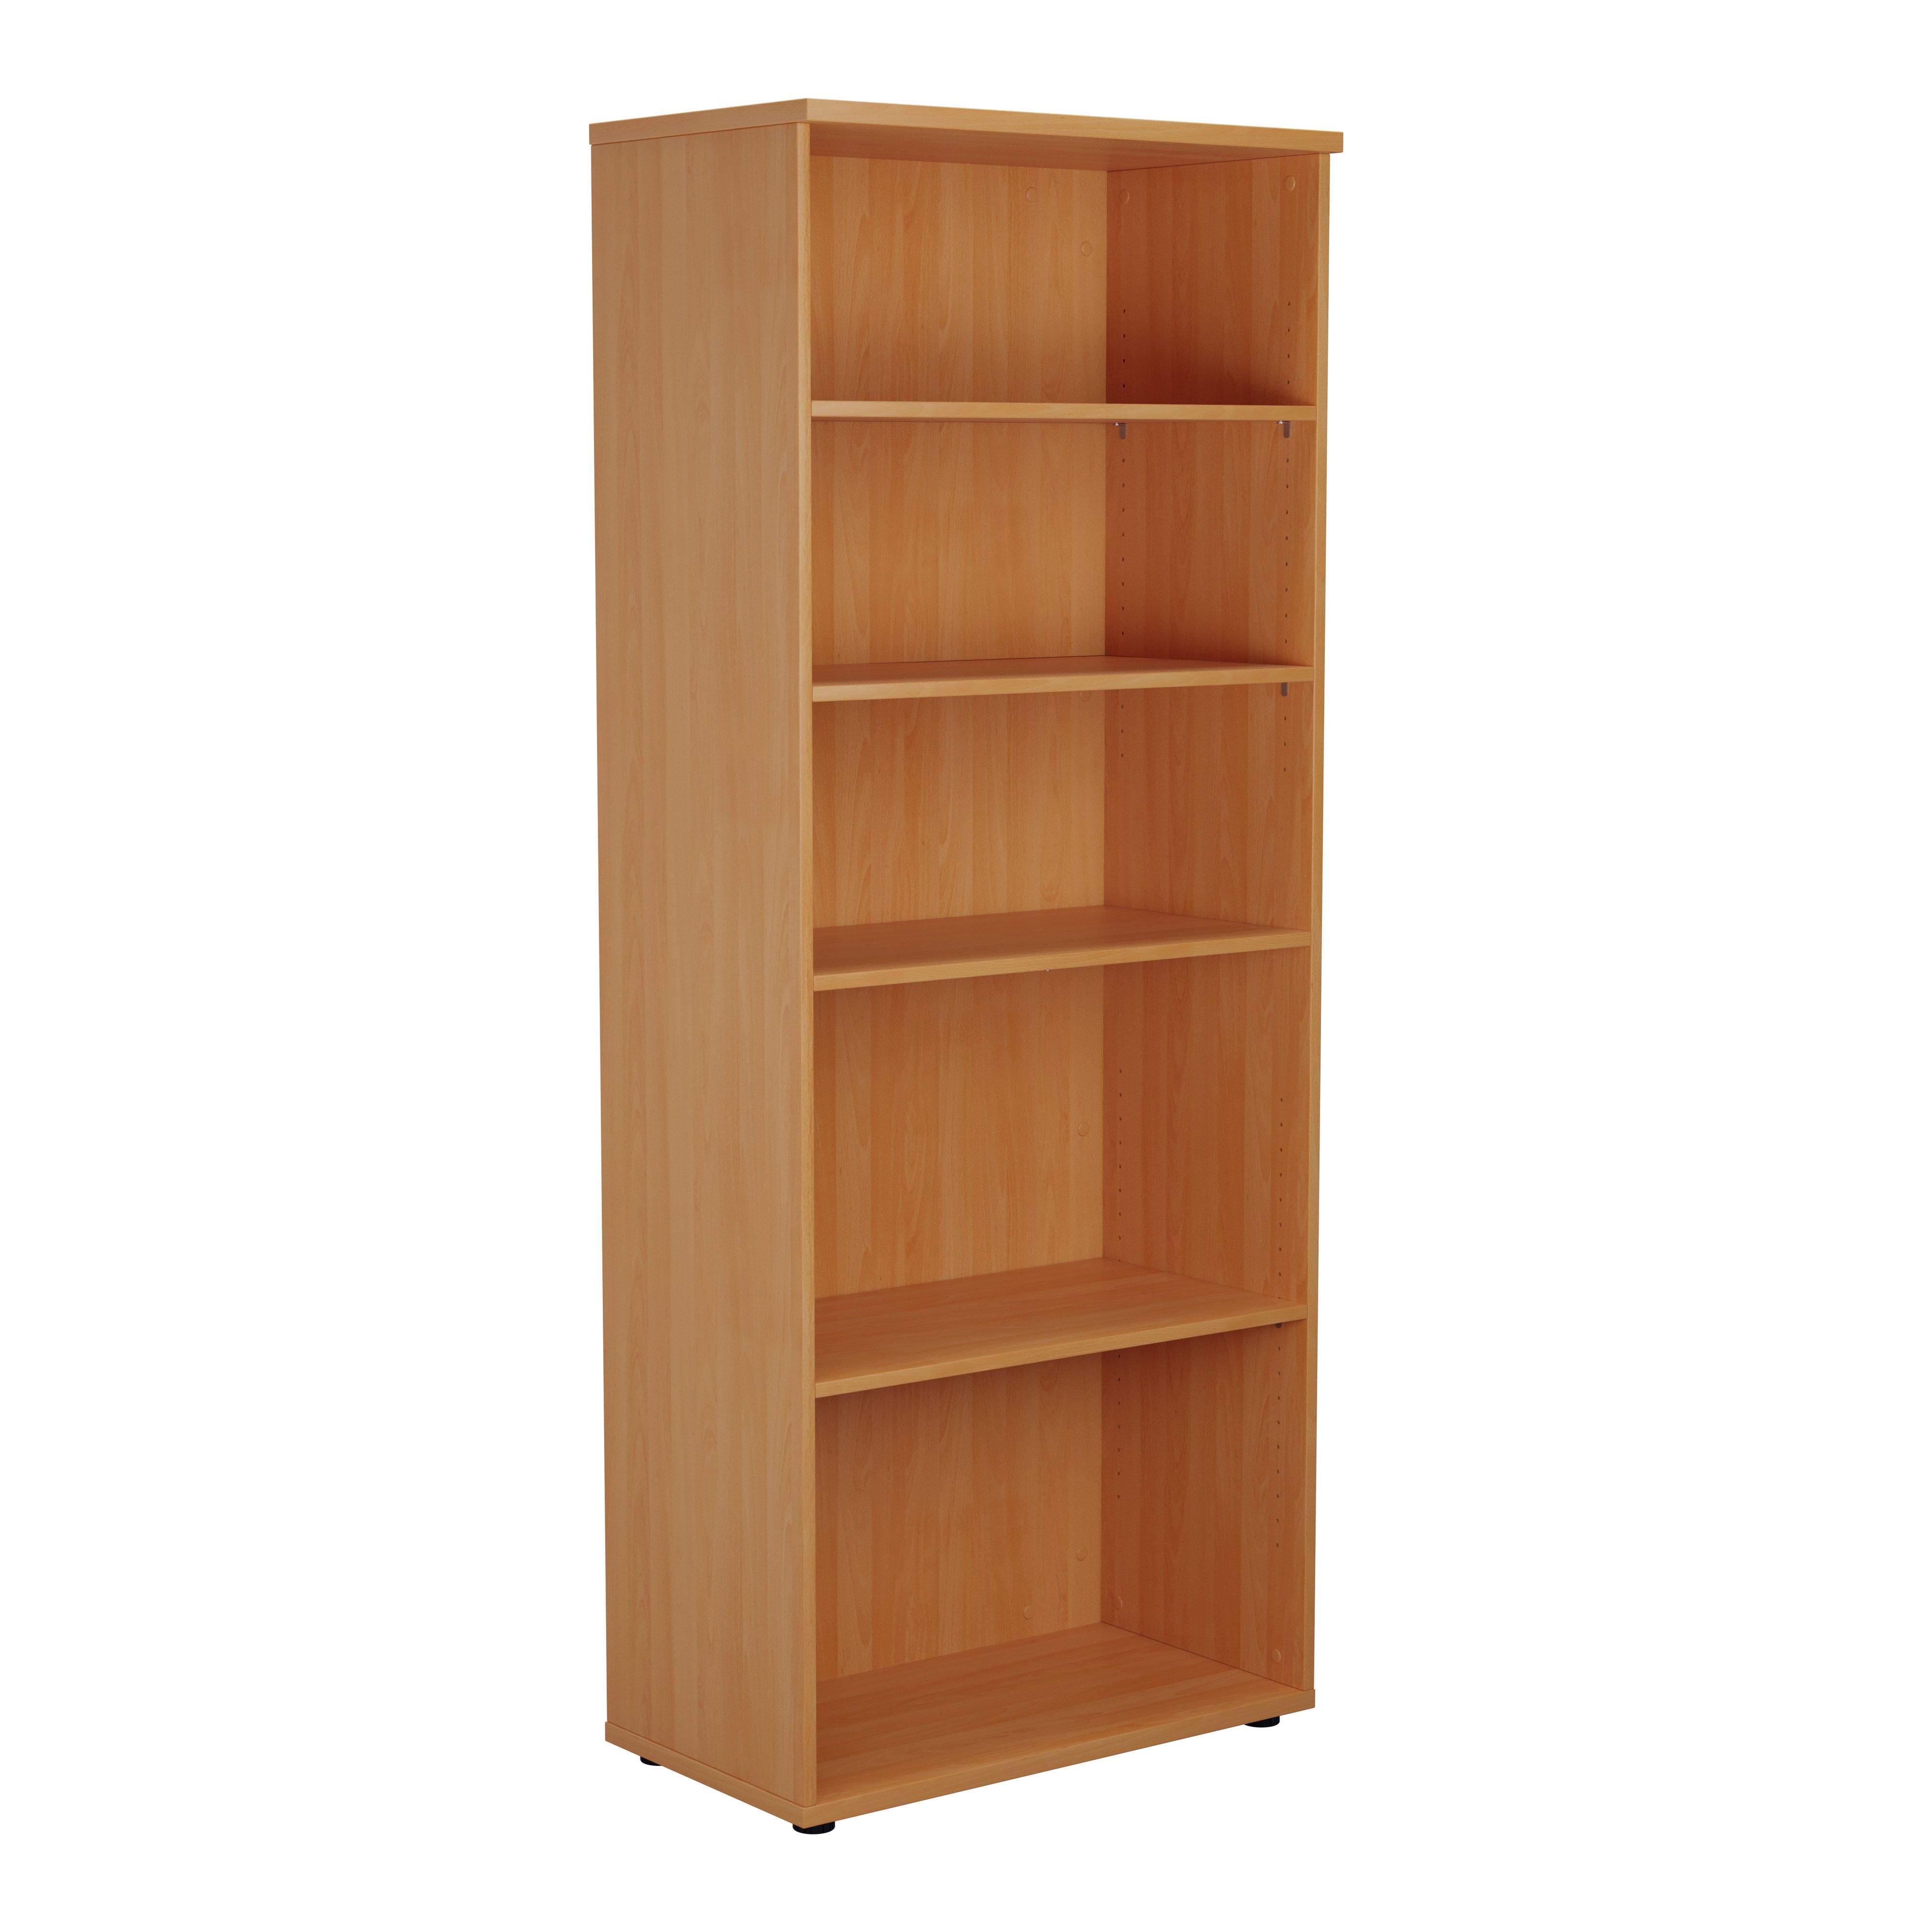 2000 Wooden Bookcase 450mm Deep, How Deep Should A Bookcase Be